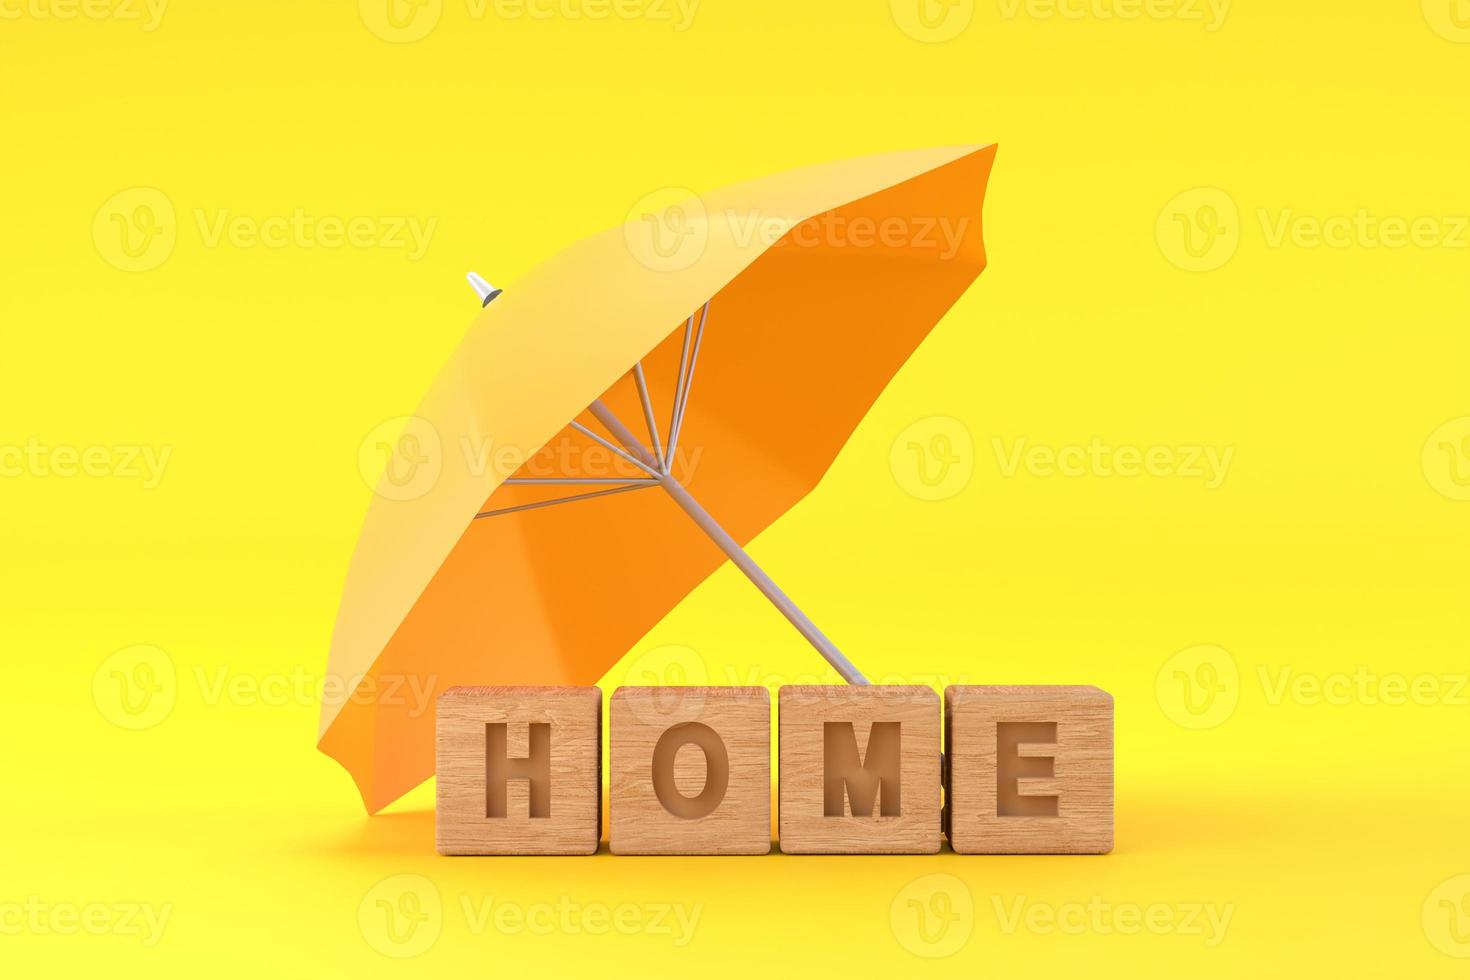 yellow umbrella protecting home for house insurance concept photo